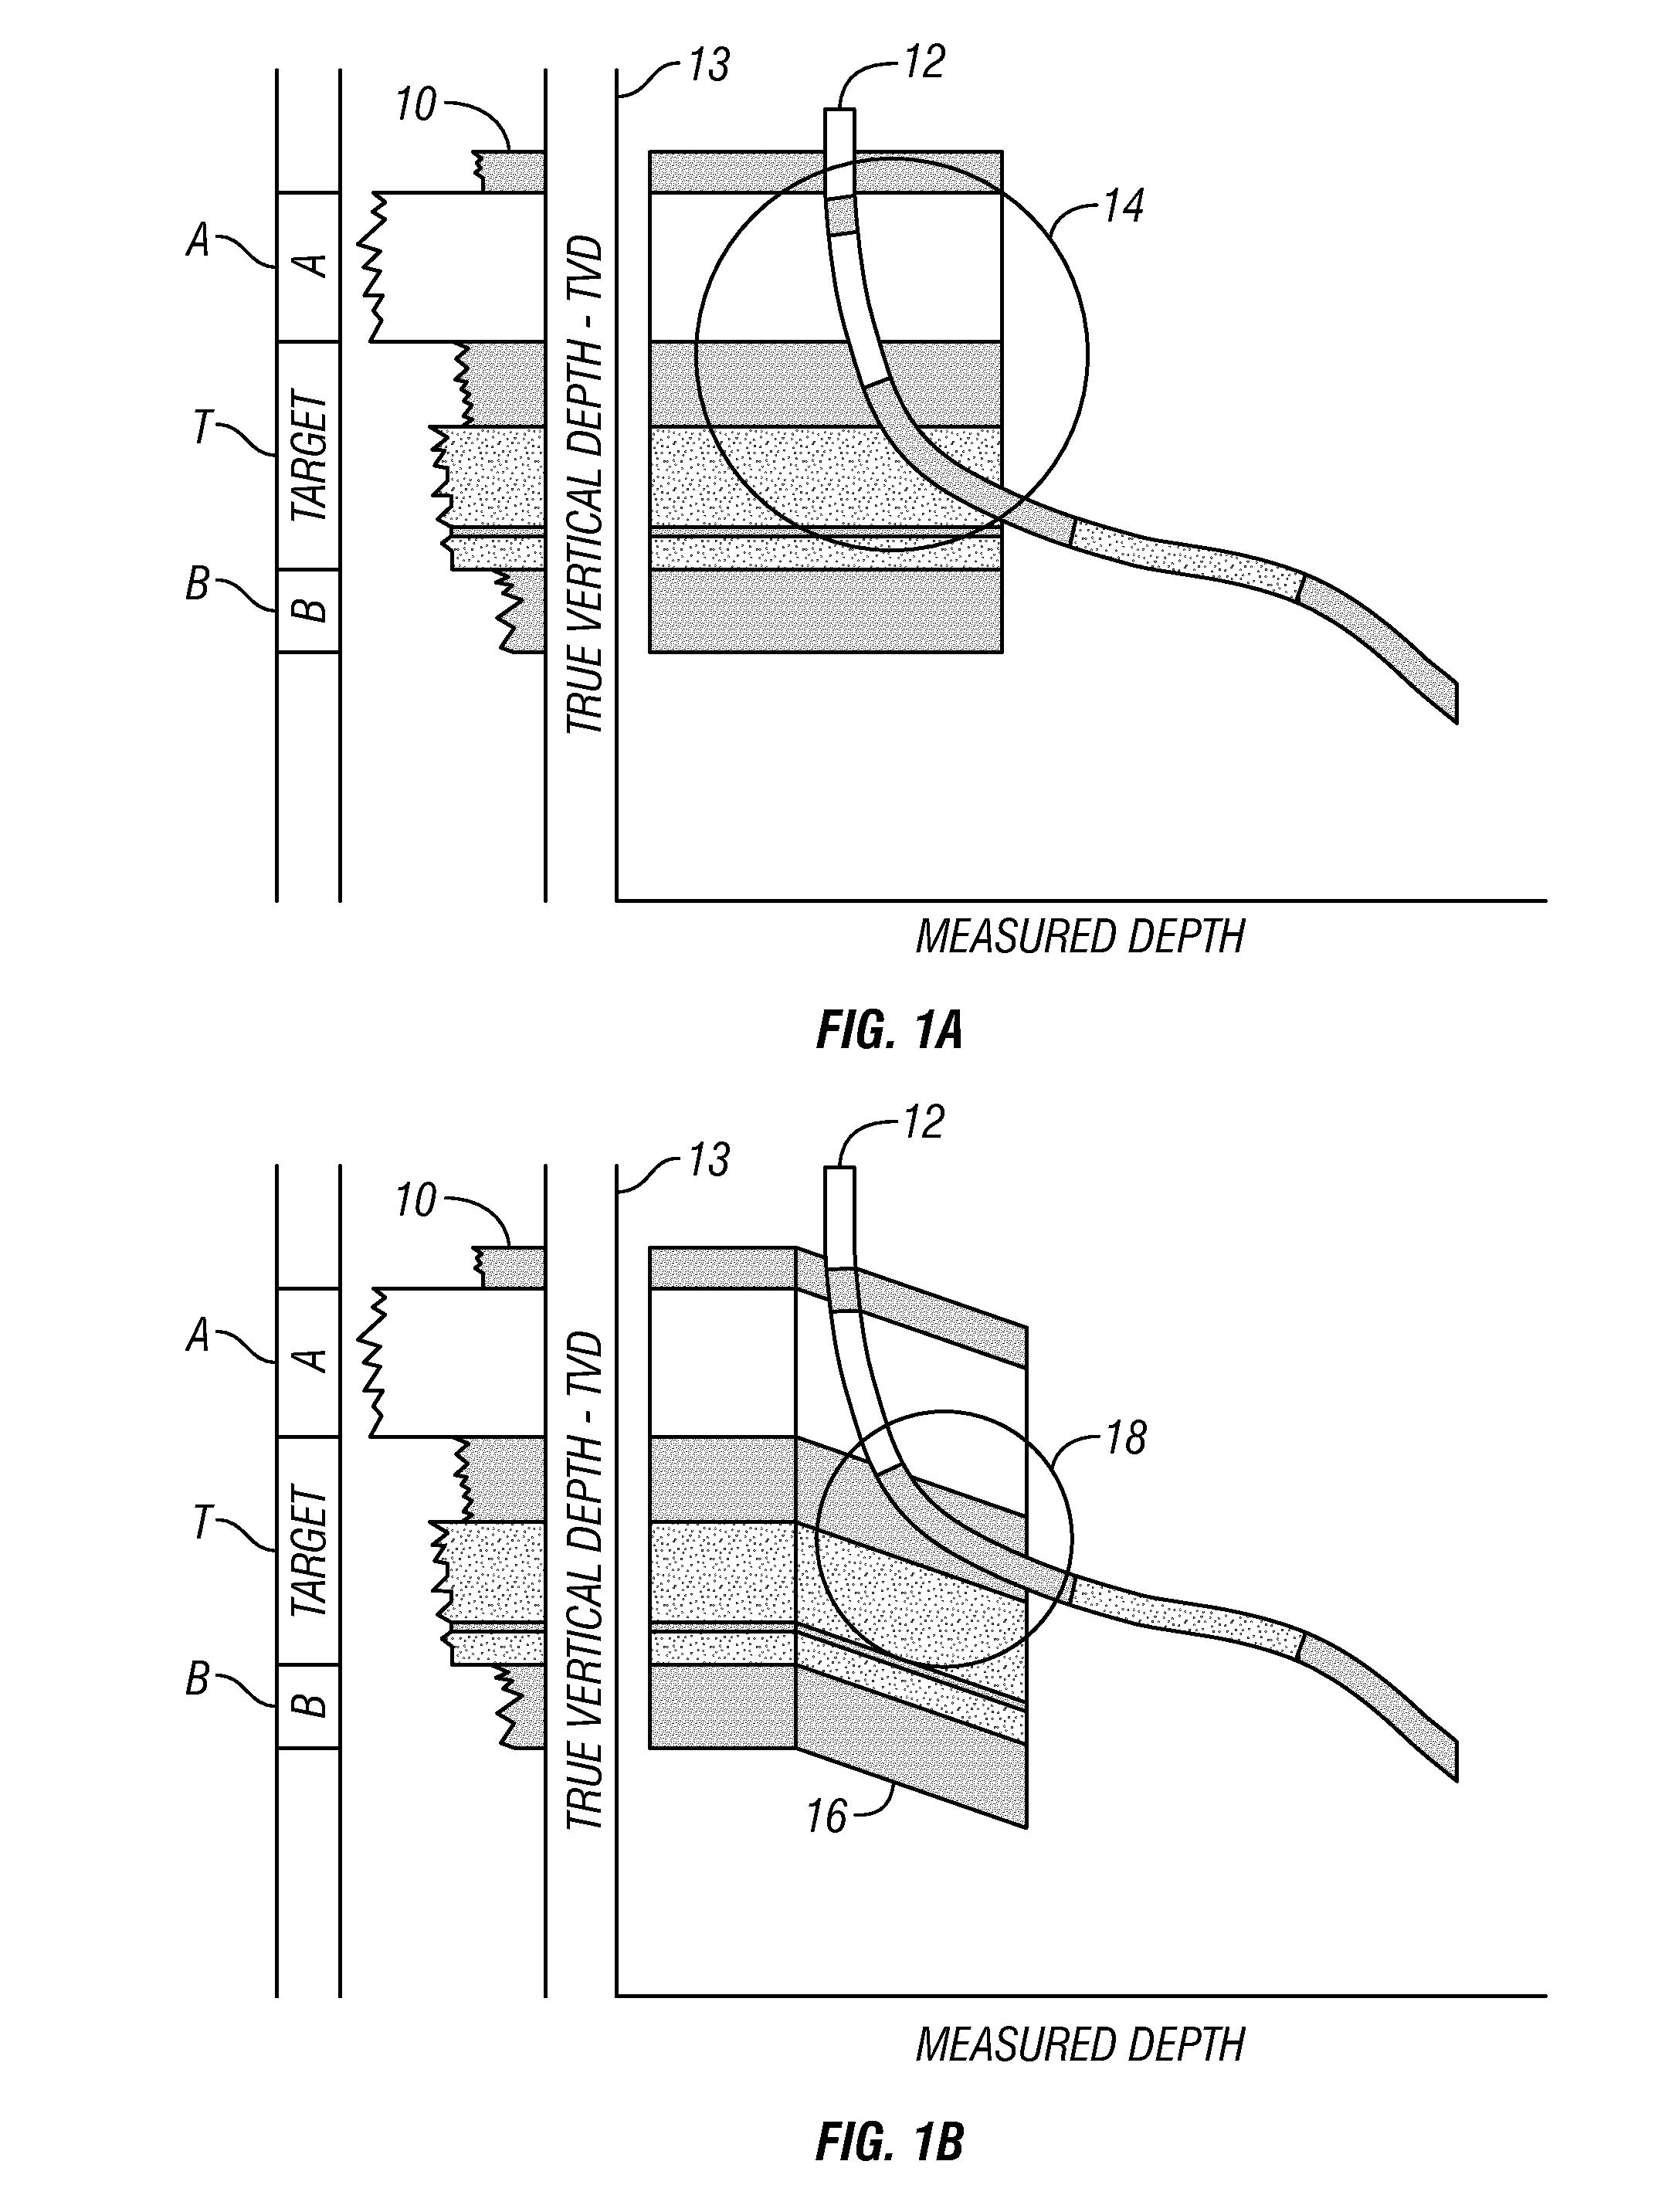 Method for determining stratigraphic position of a wellbore during driling using color scale interpretation of strata and its application to wellbore construction operations